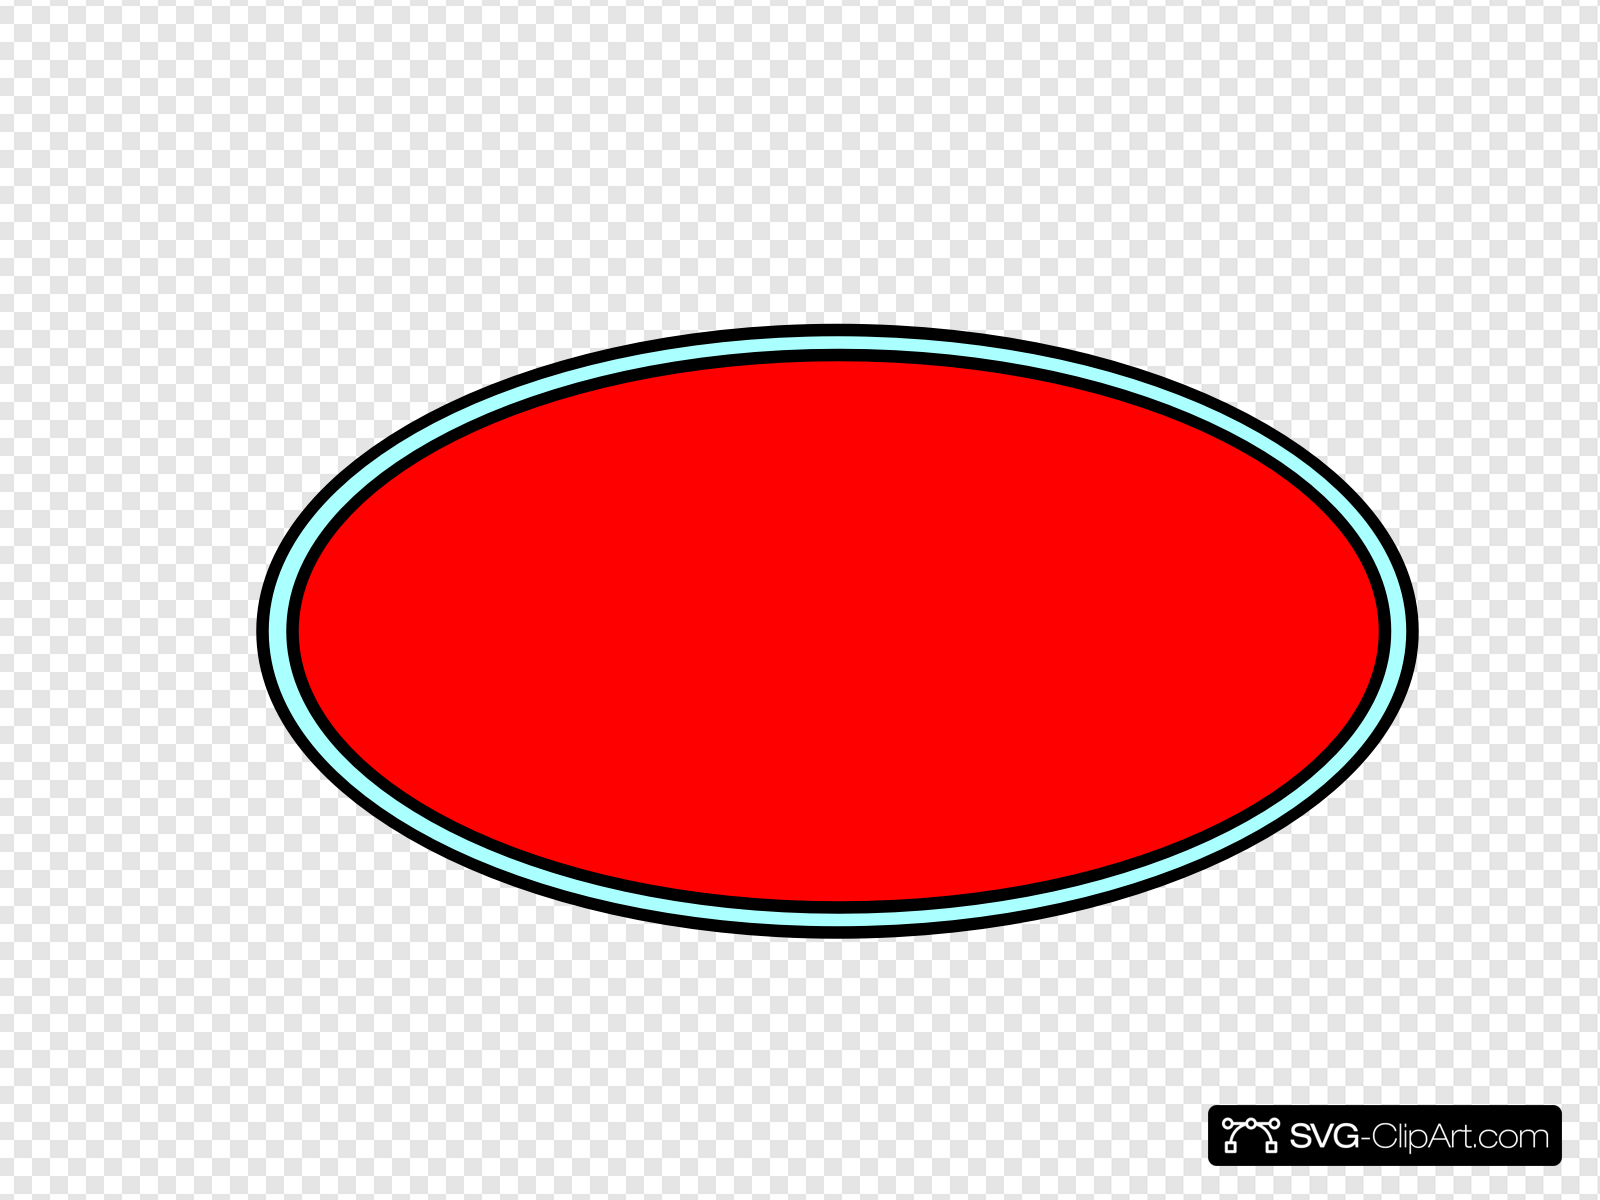 Red And Aqua Oval Clip art, Icon and SVG